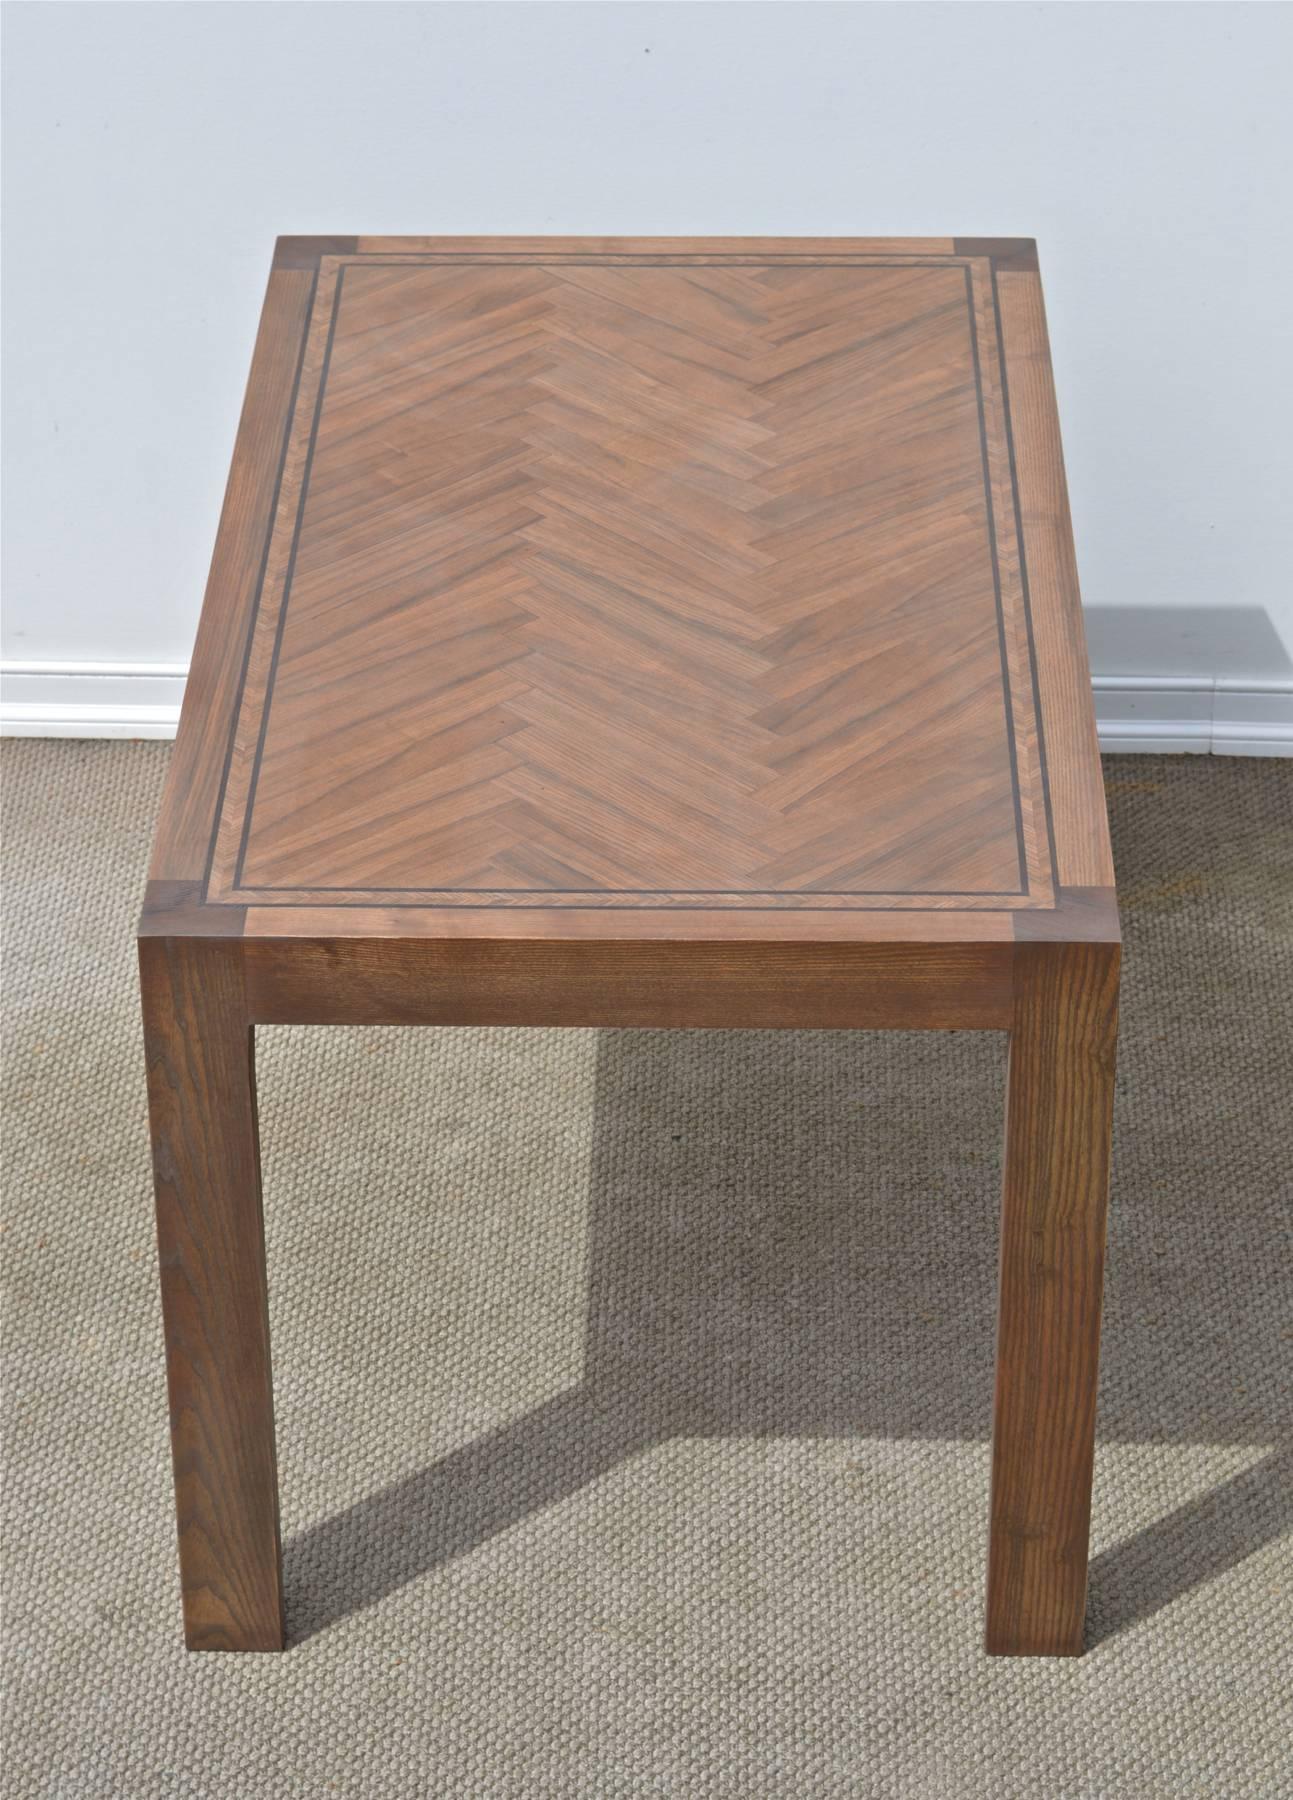 Bench made parsons style dining table of oak. Gorgeous herringbone inlay on the top. 
Custom sizes and finishes available.